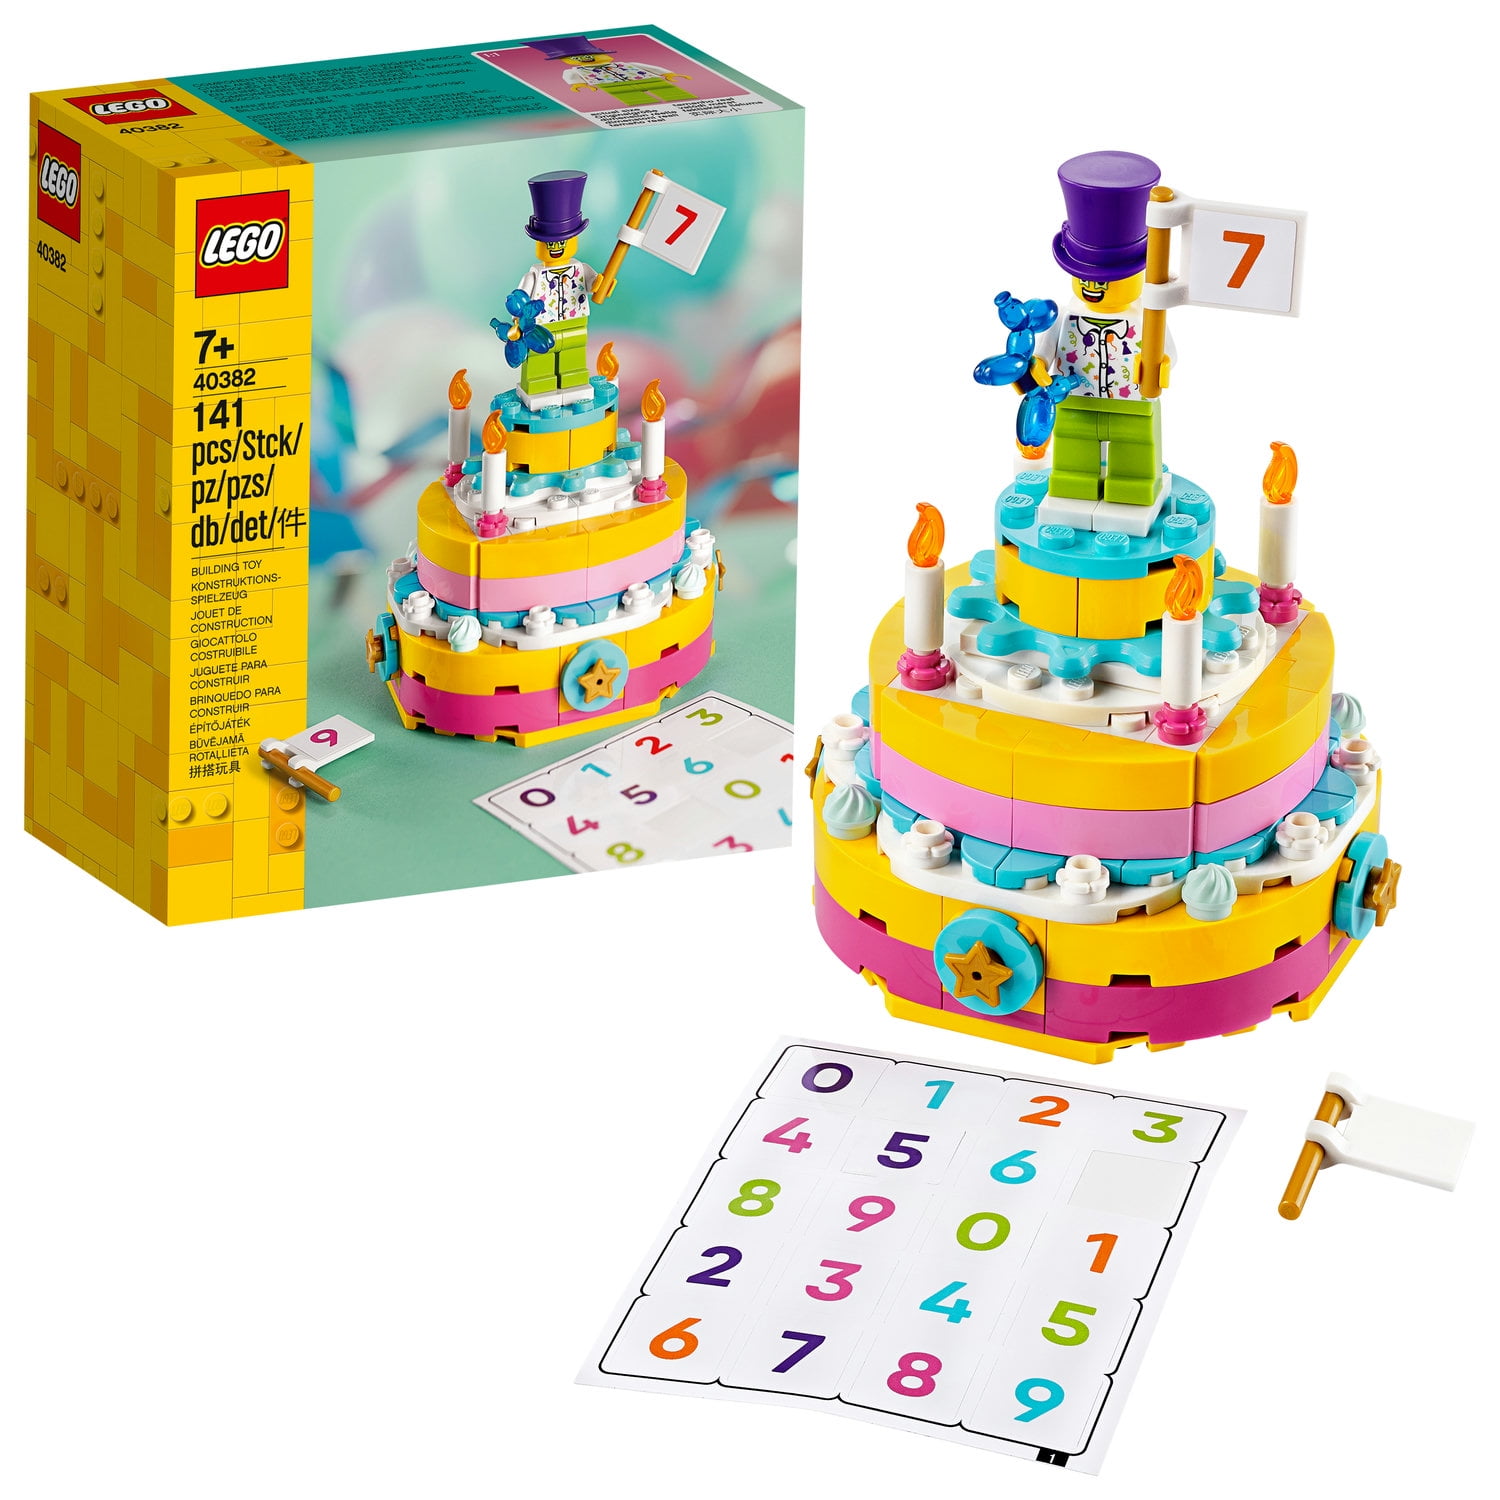 LEGO BIRTHDAY PARTY KIT FOR 10 AND LEGO BIRTHDAY TABLE TOP CAKE NIB 